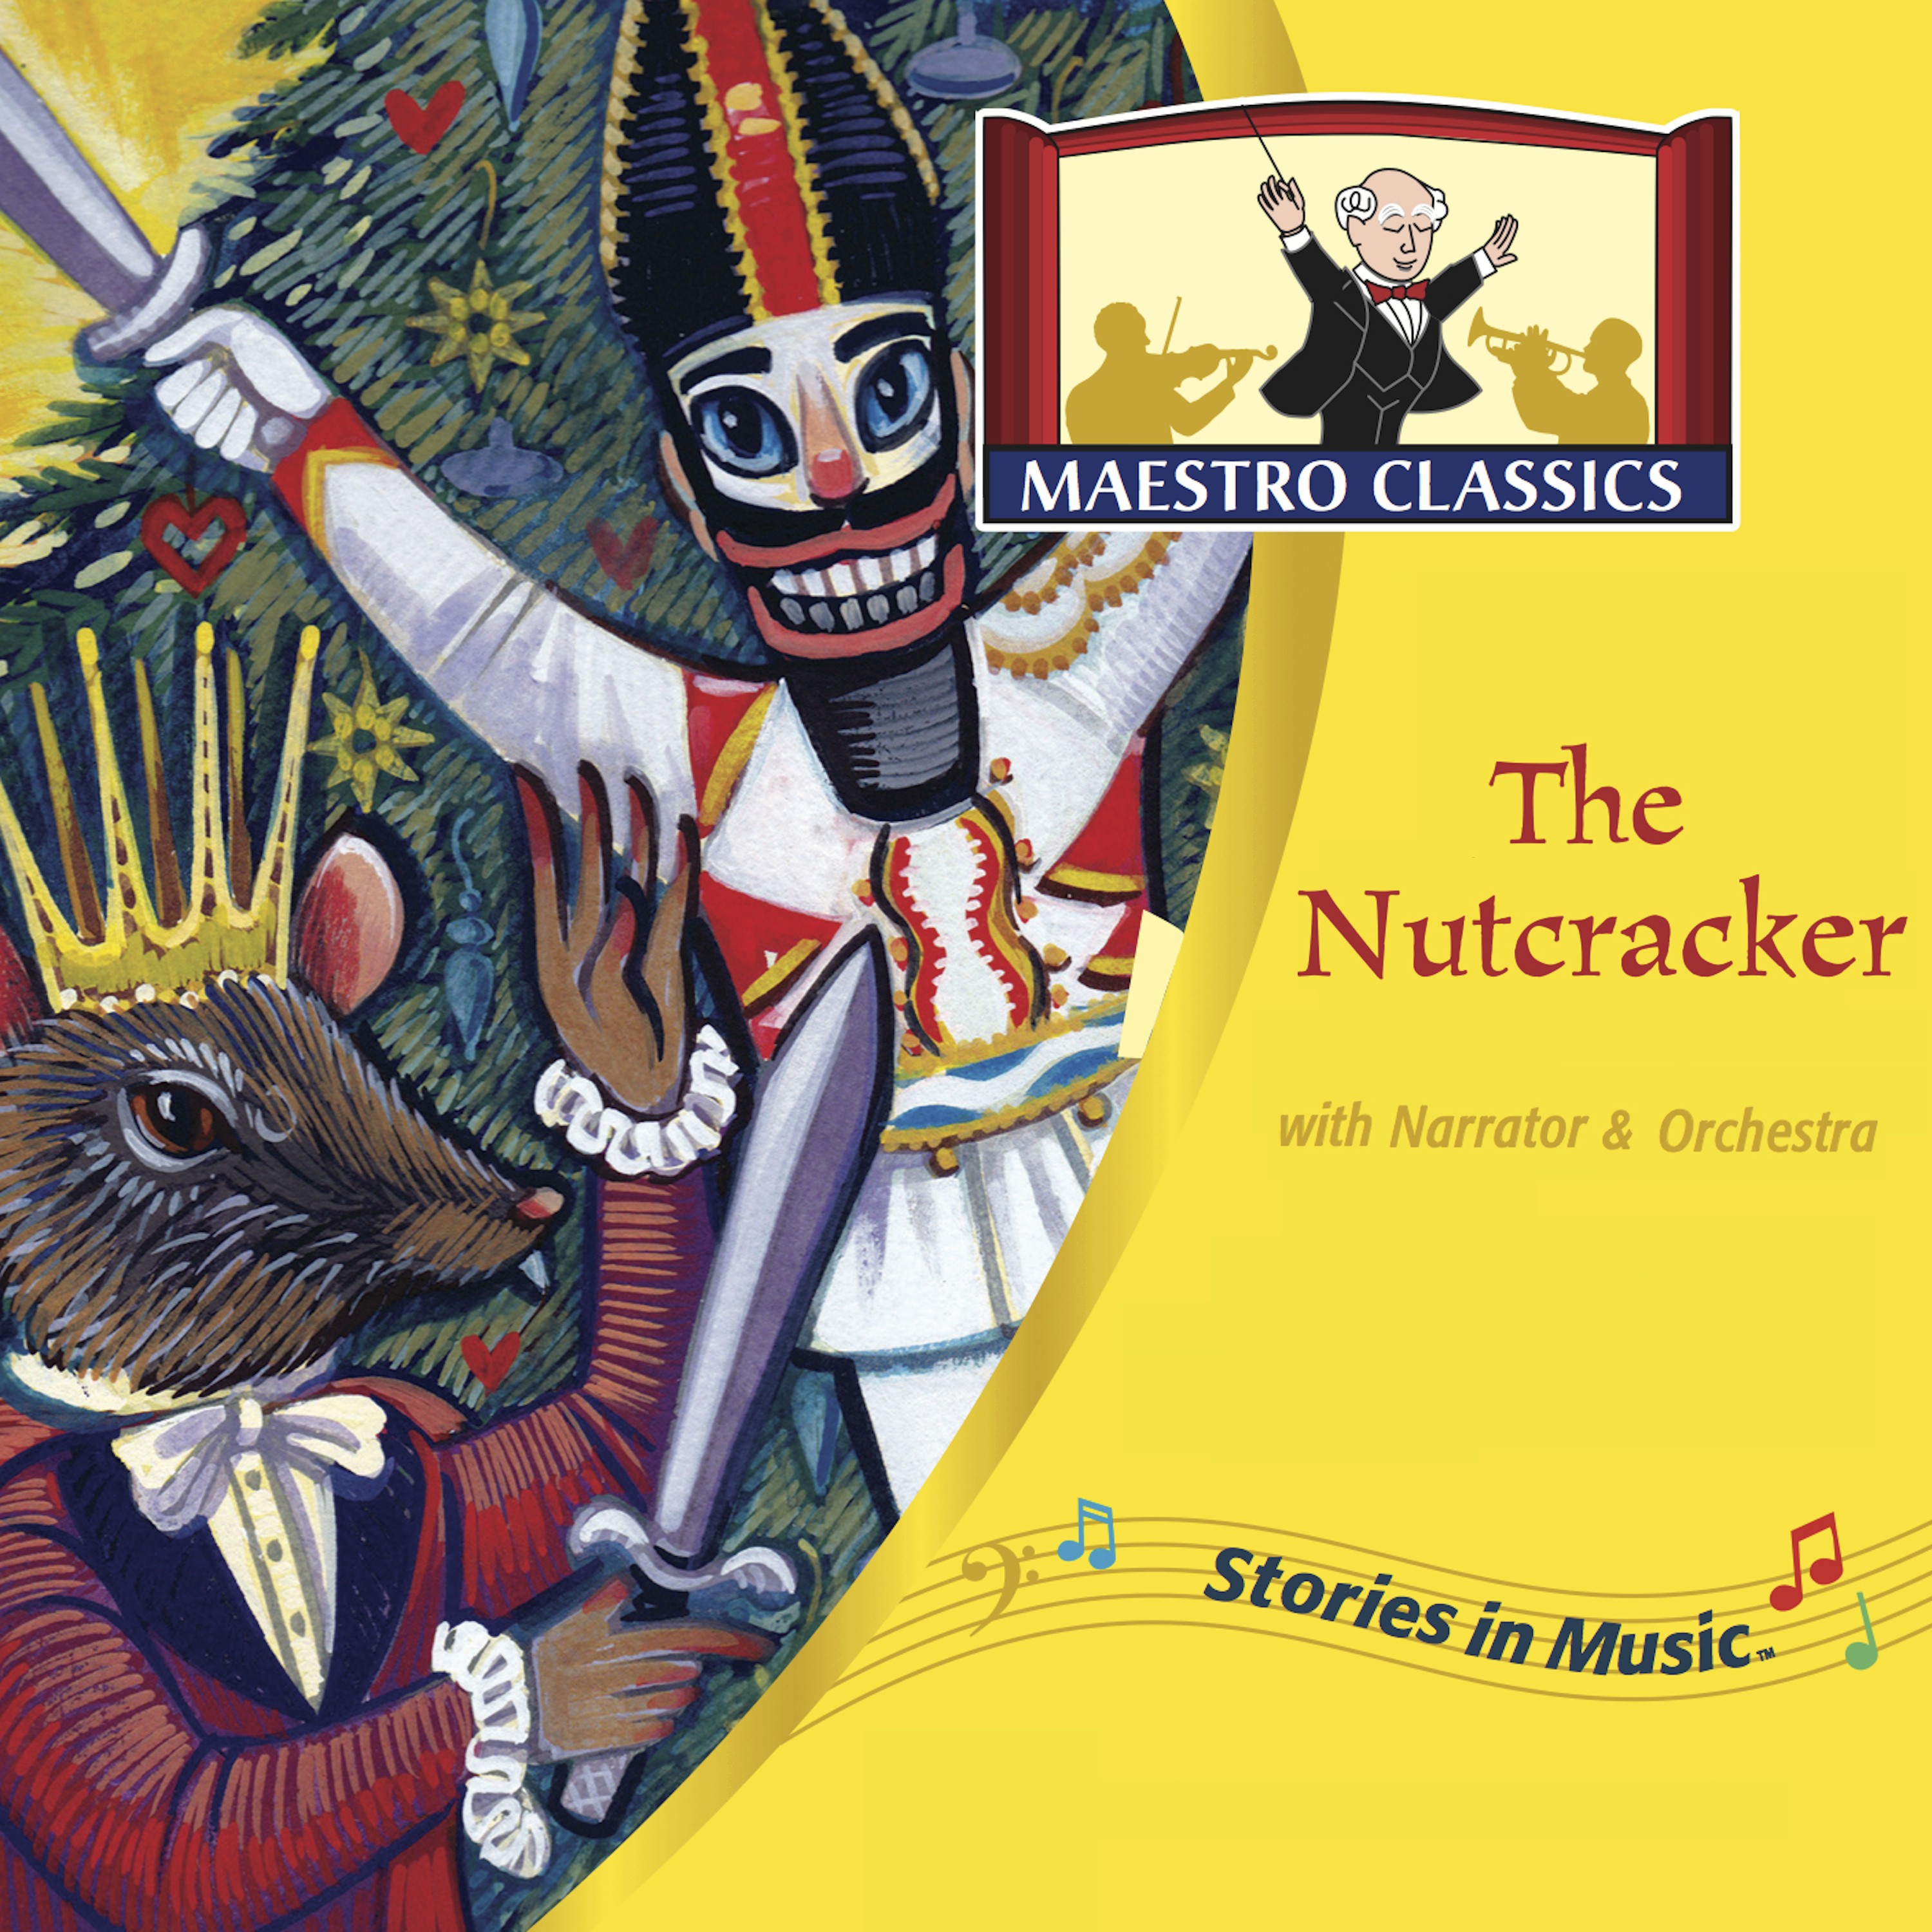 The Nutcracker with Narrator & Orchestra